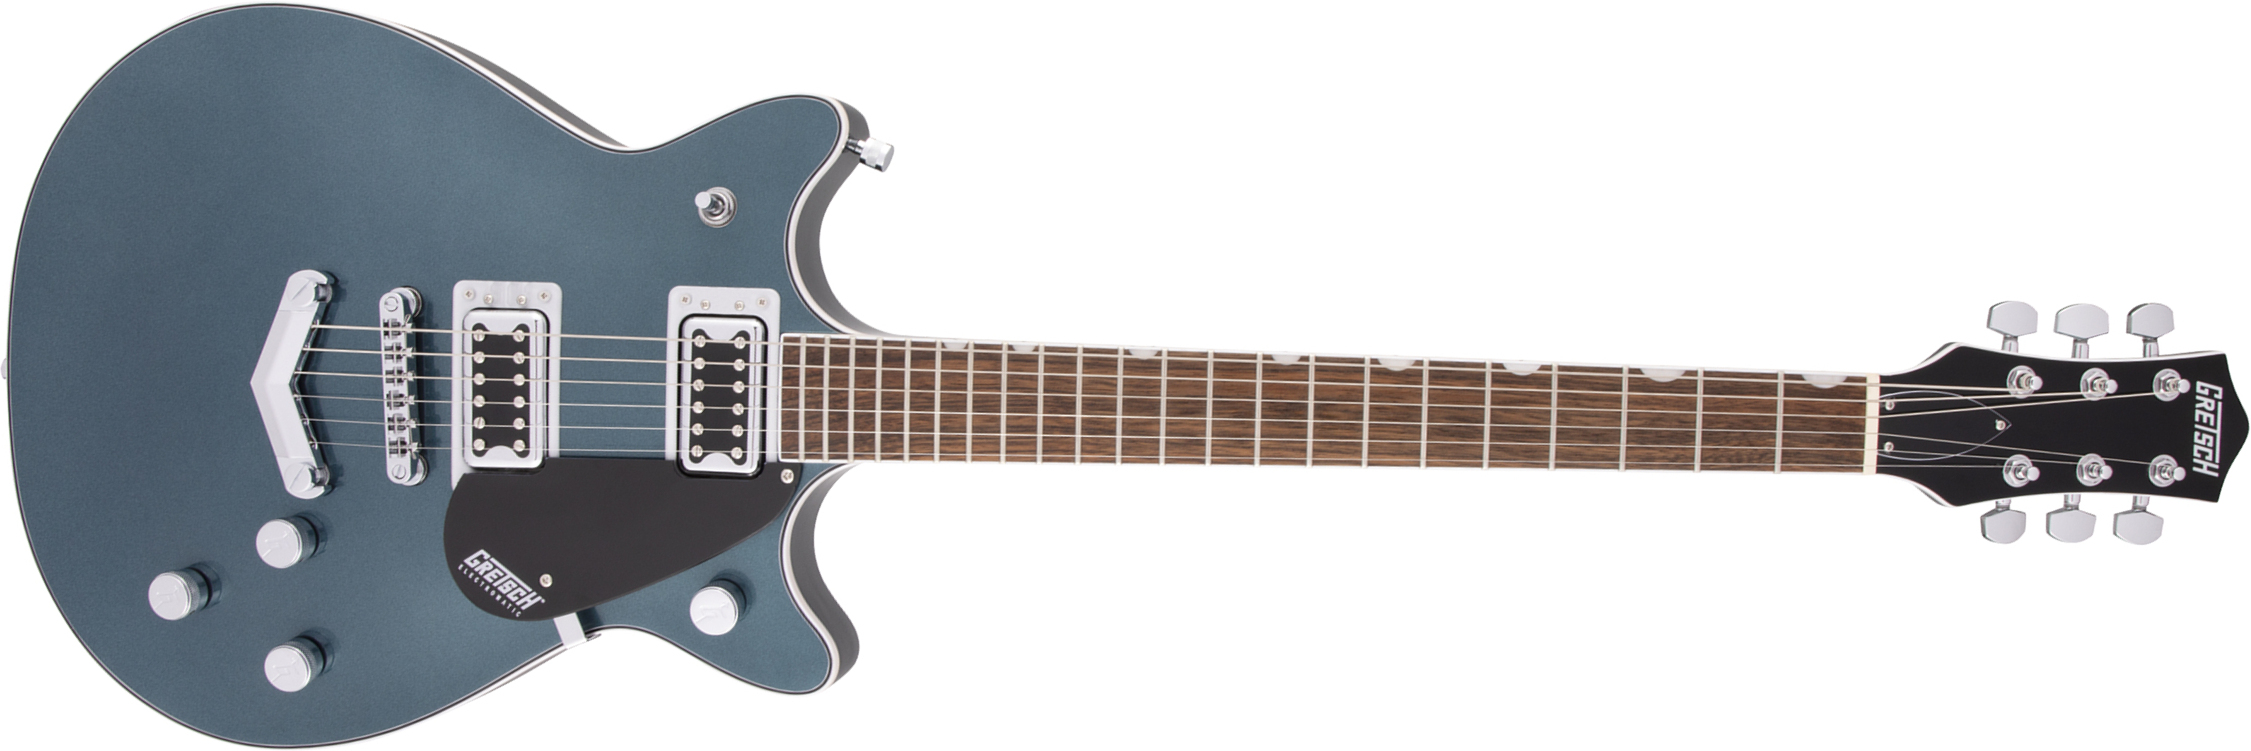 Gretsch G5222 Electromatic Double Jet Bt V-stoptail Hh Ht Lau - Jade Grey Metallic - Double cut electric guitar - Main picture